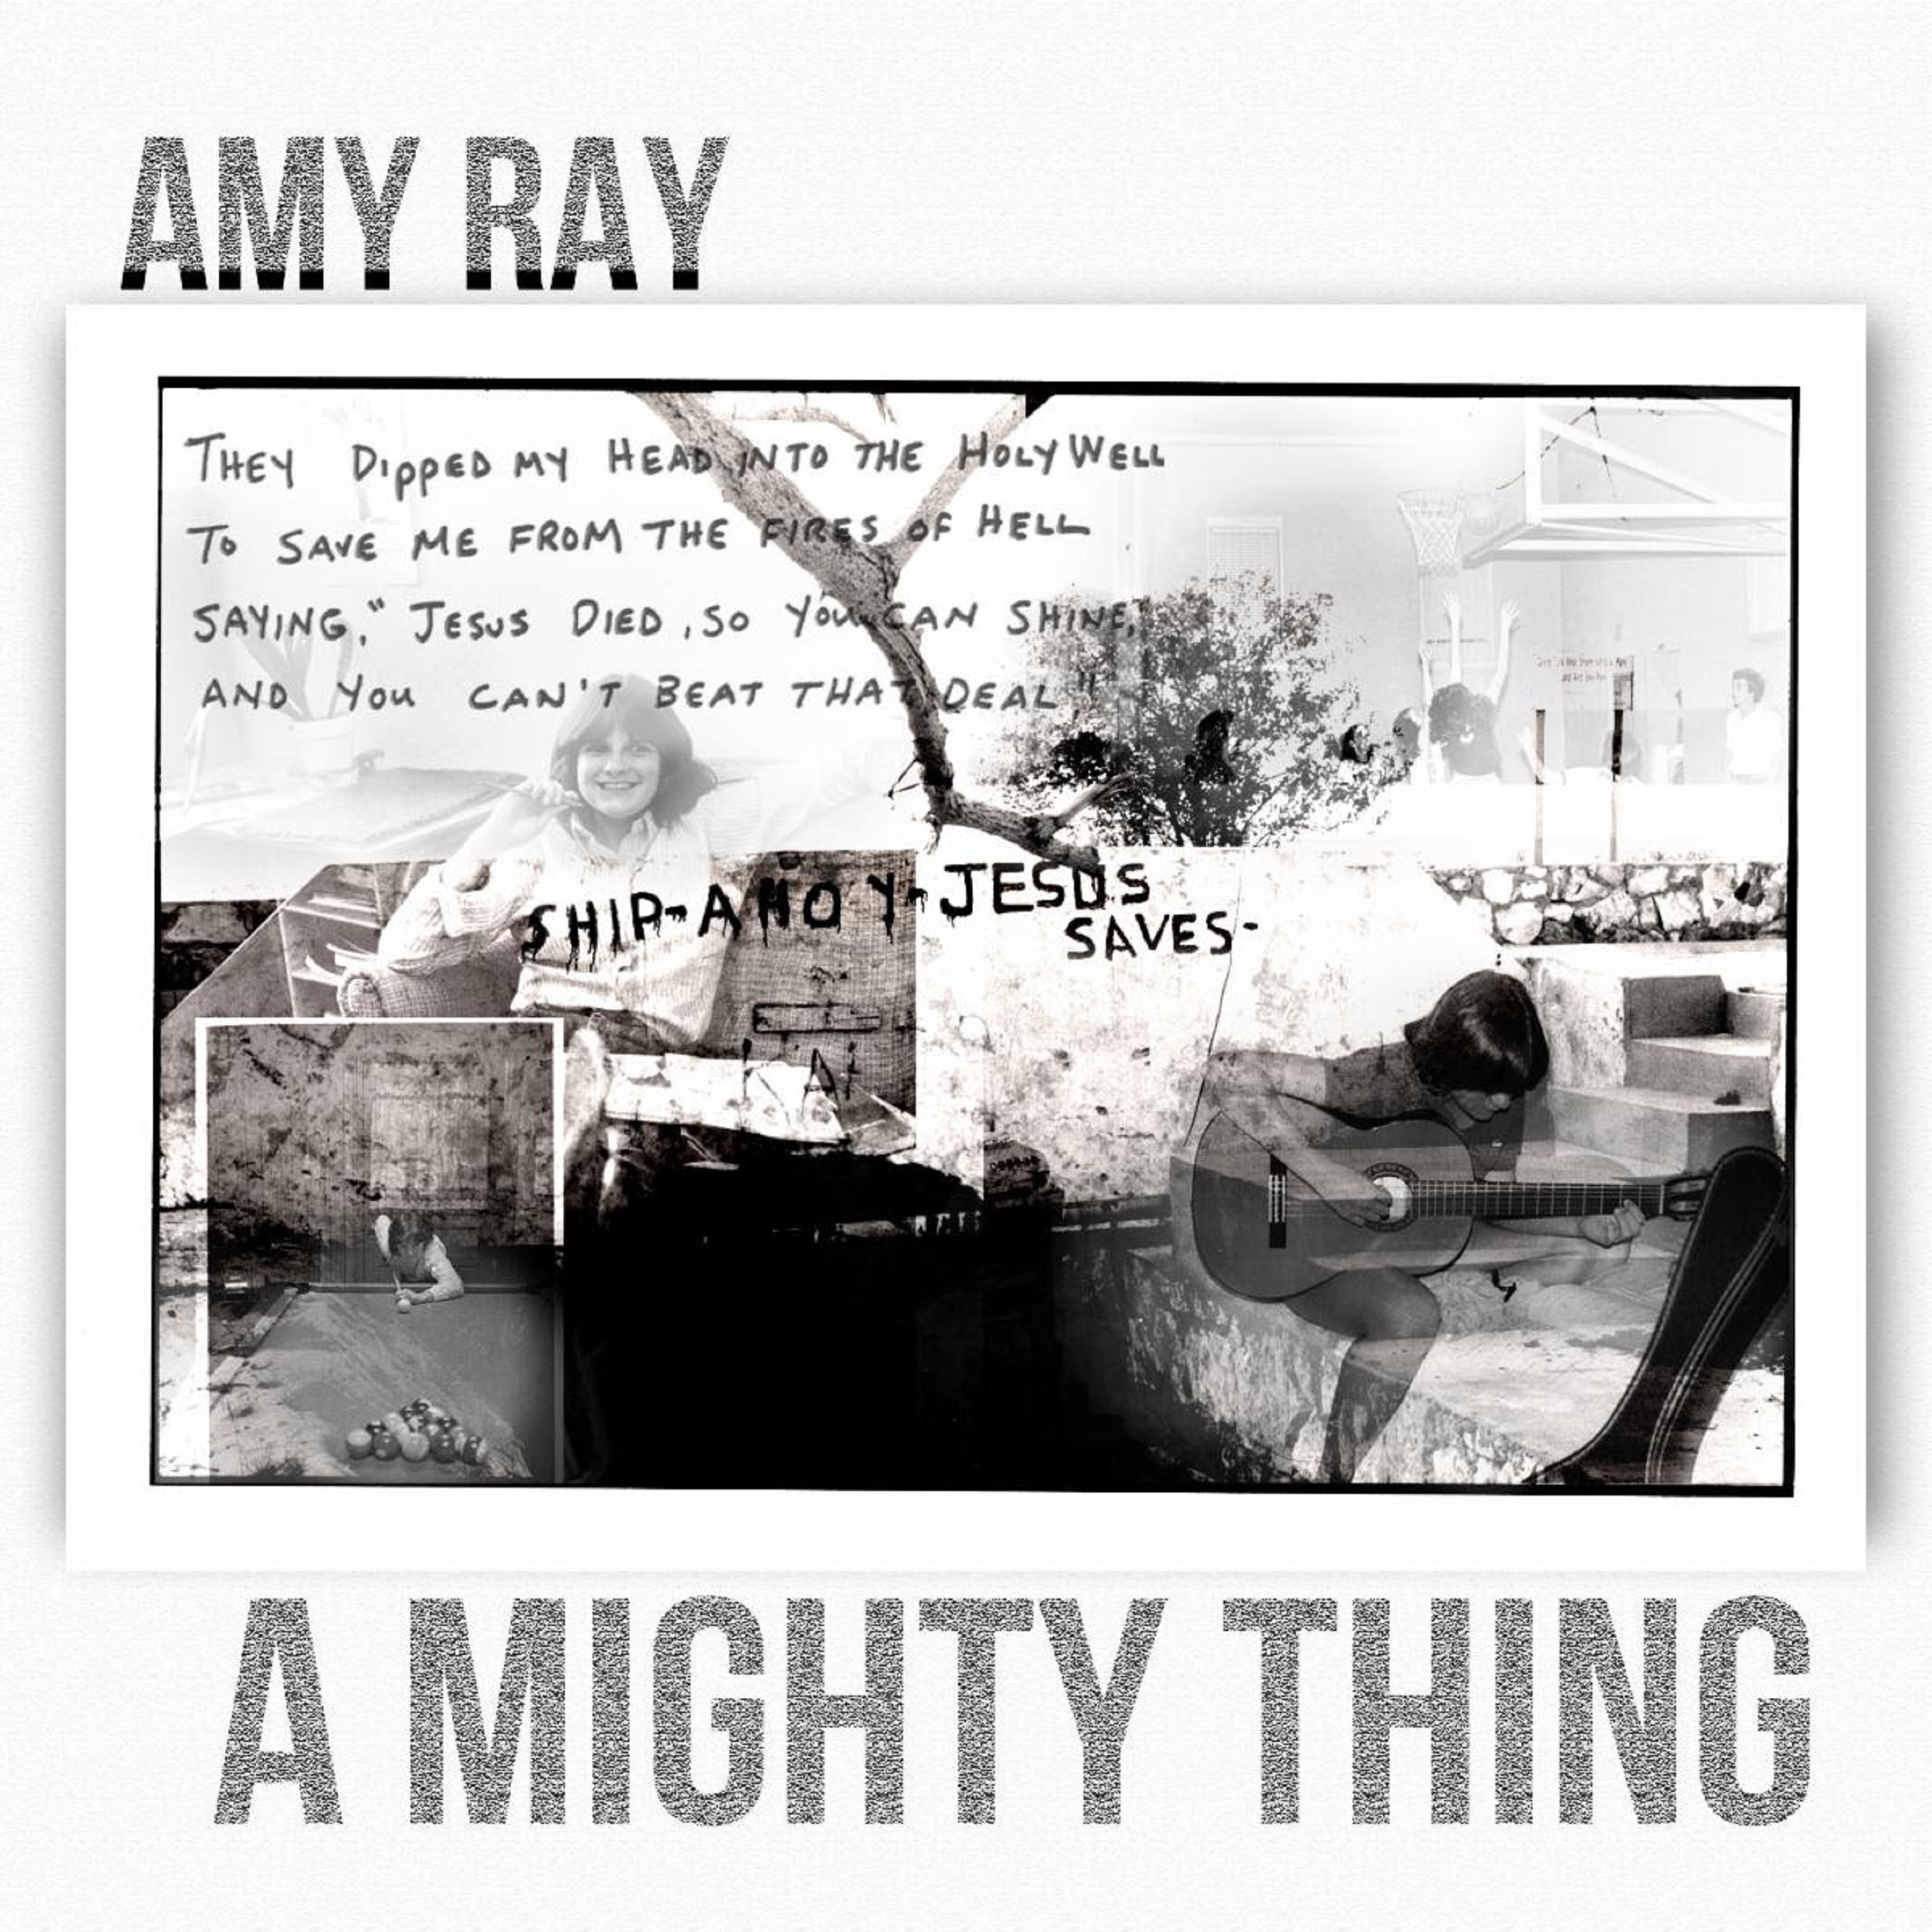 AMY RAY shares topical video from her new album IF IT ALL GOES SOUTH, out September 16